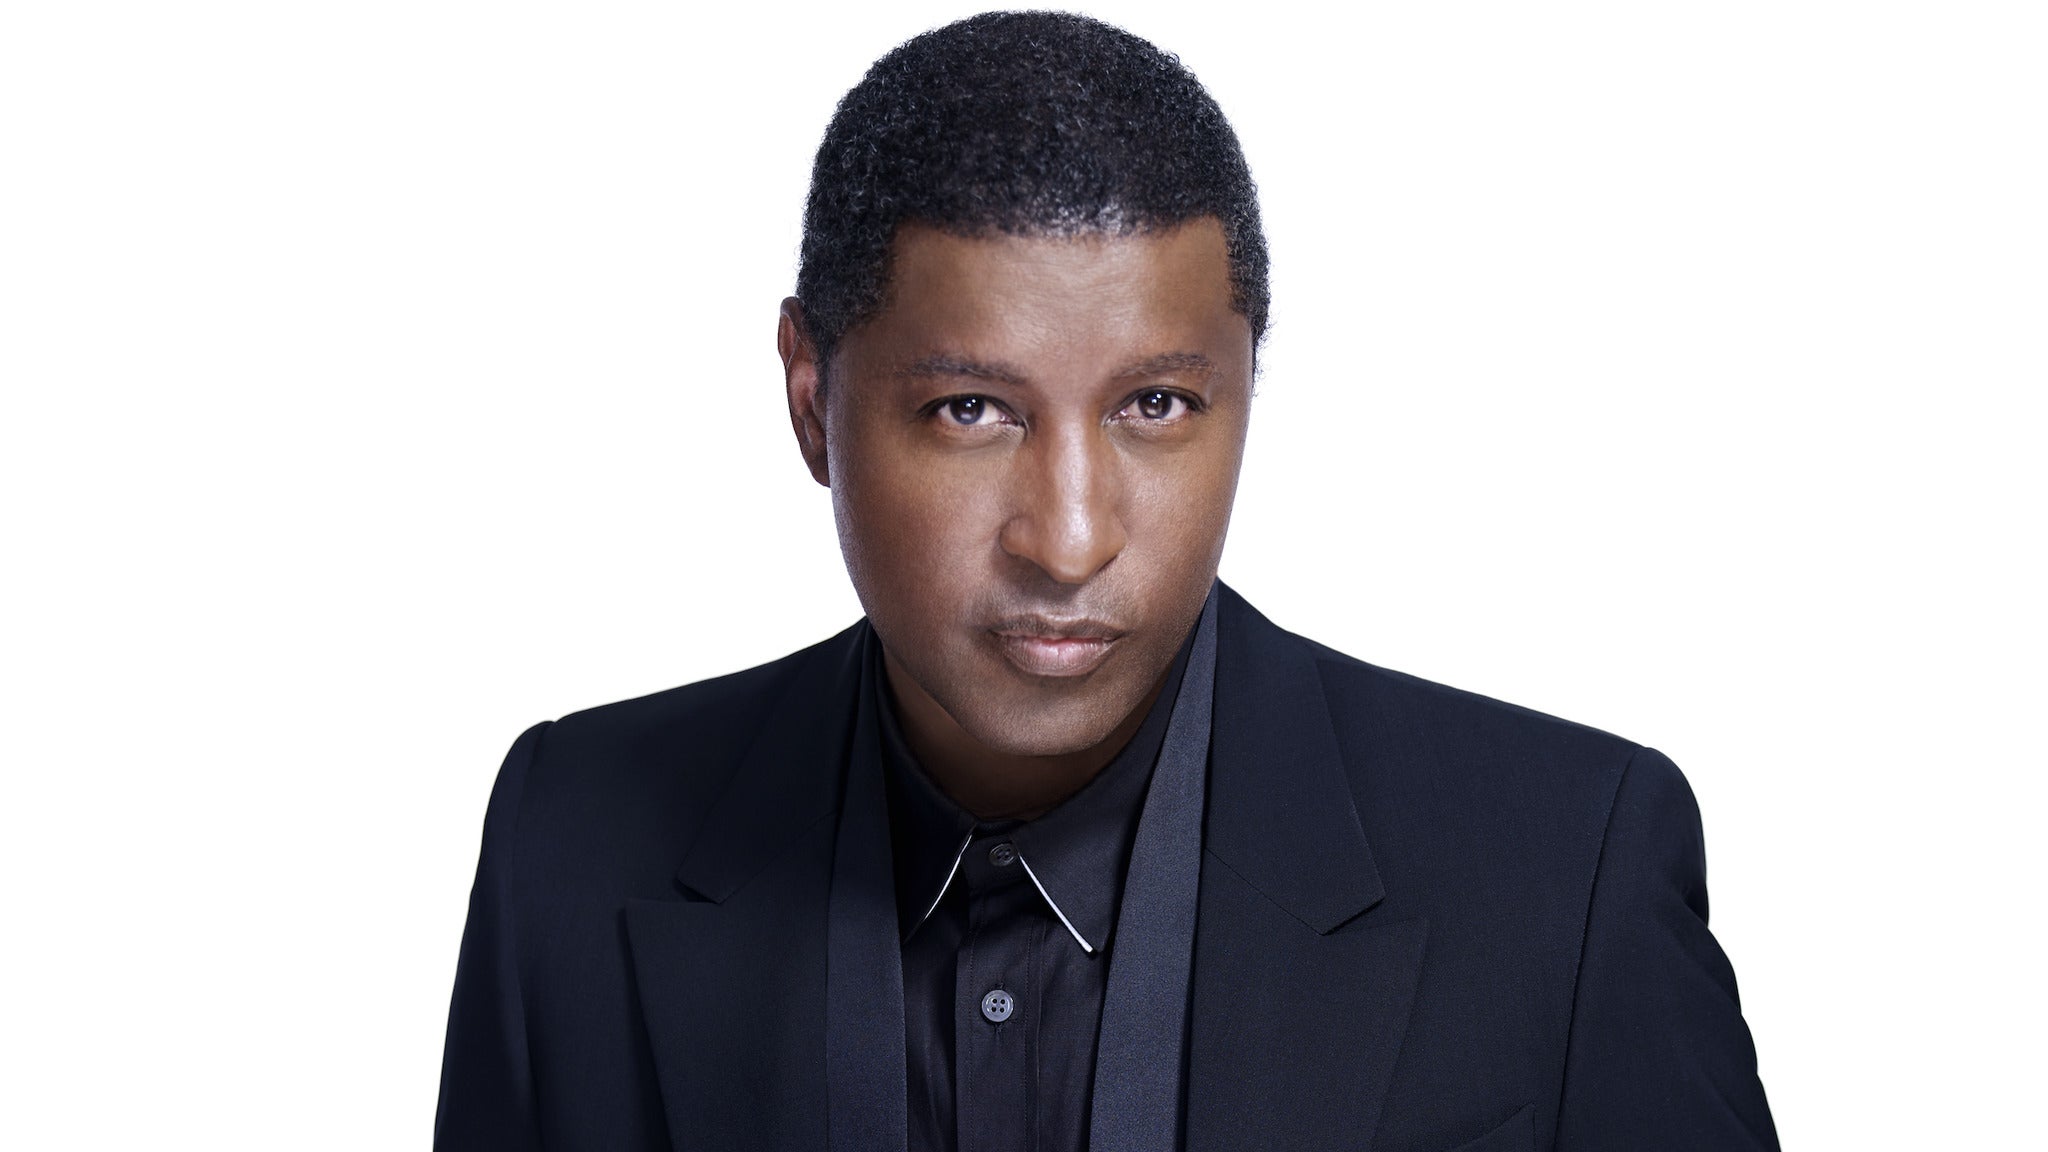 An Evening With Babyface in Hammond promo photo for Facebook / Promoter presale offer code